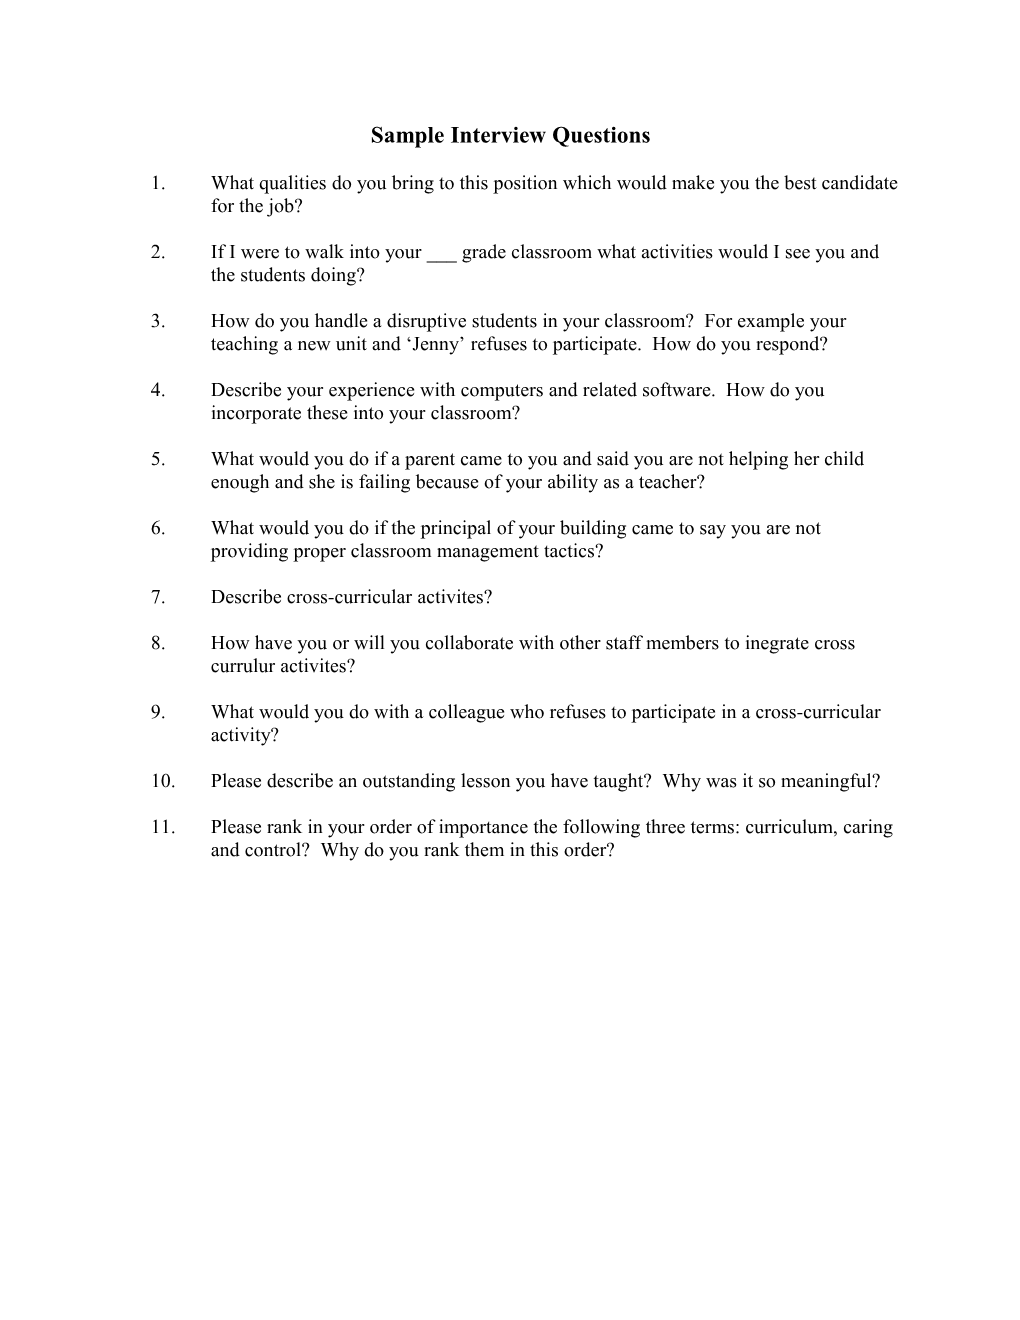 Sample Interview Questions s5